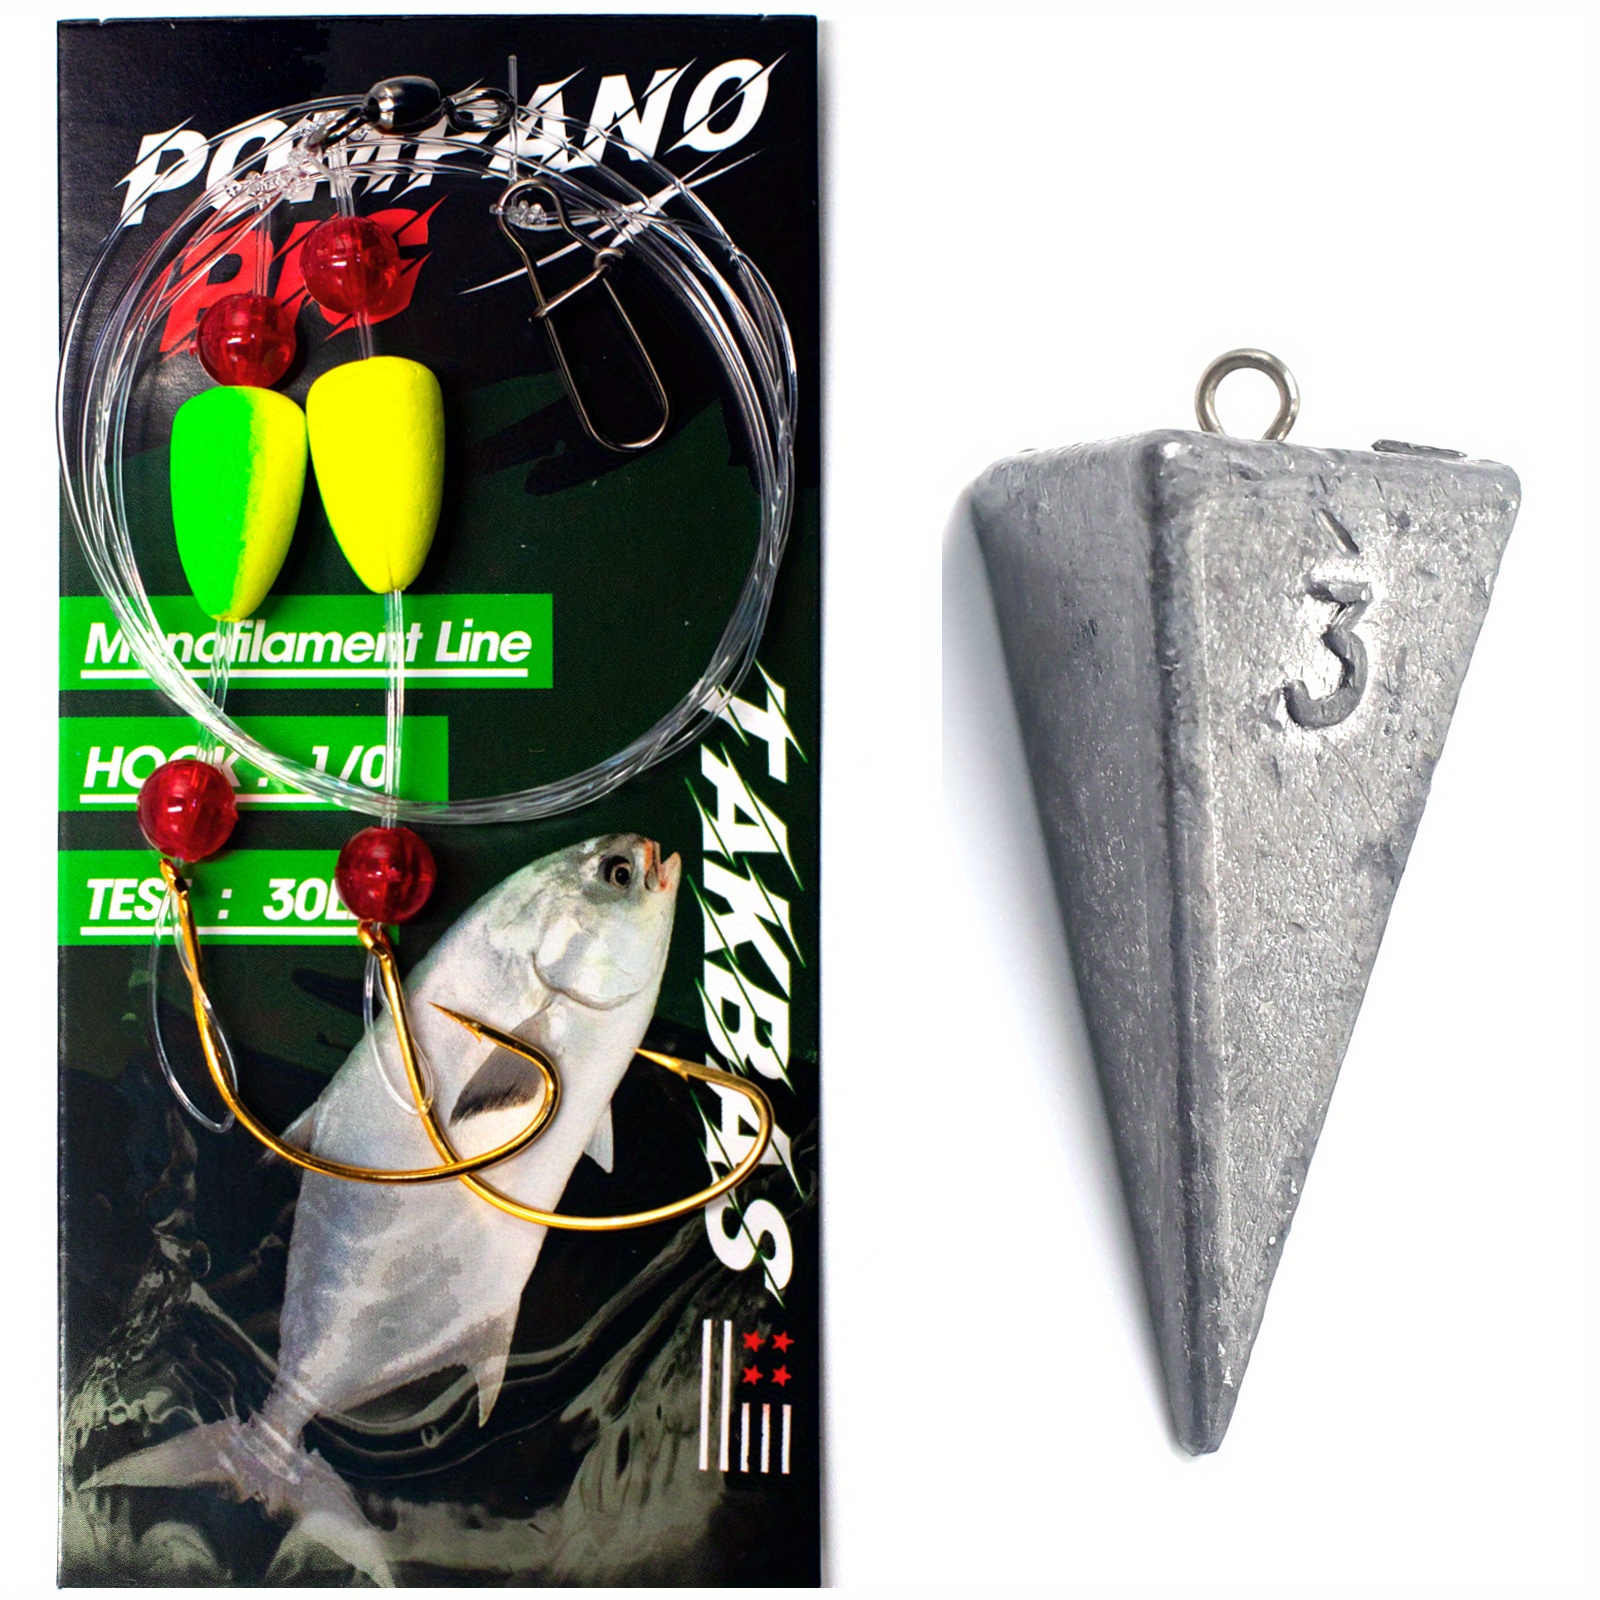 Pompano 1 Pack Double Drops Fishing Rigs, 30LB/13.61KG Pull Fishing Floats  Rig, Fishing Accessories For Saltwater, Surf Fishing